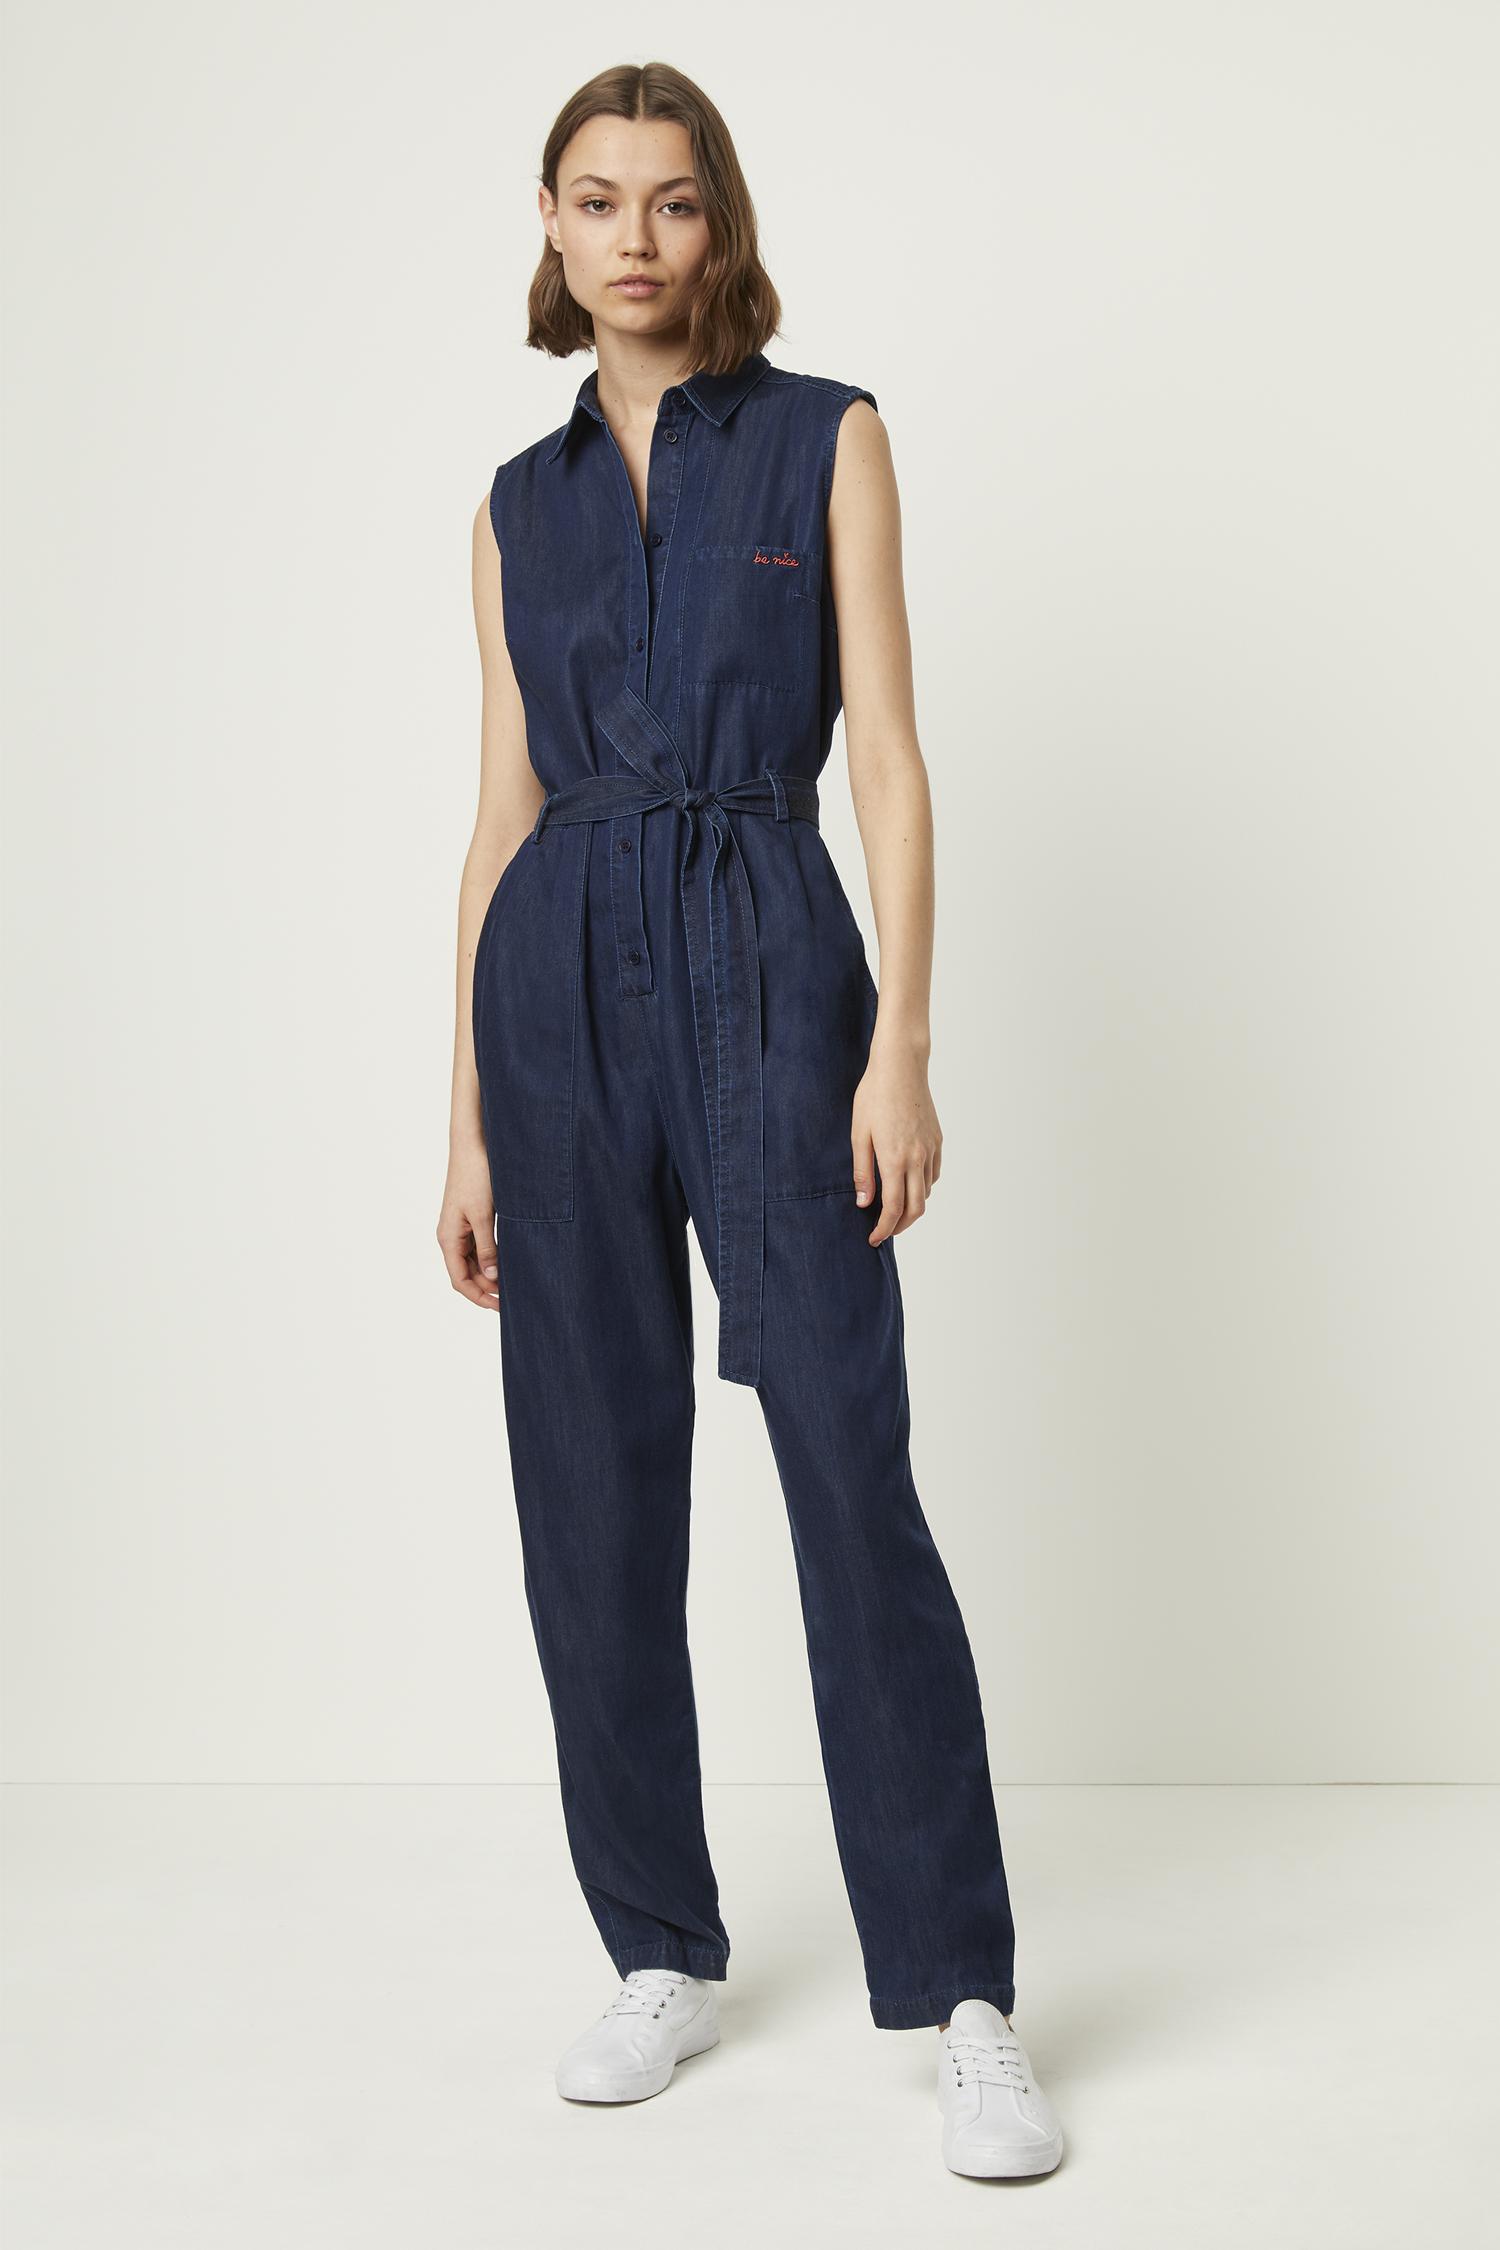 French Connection Maggia Light Sleeveless Denim Jumpsuit in Indigo (Blue) -  Lyst